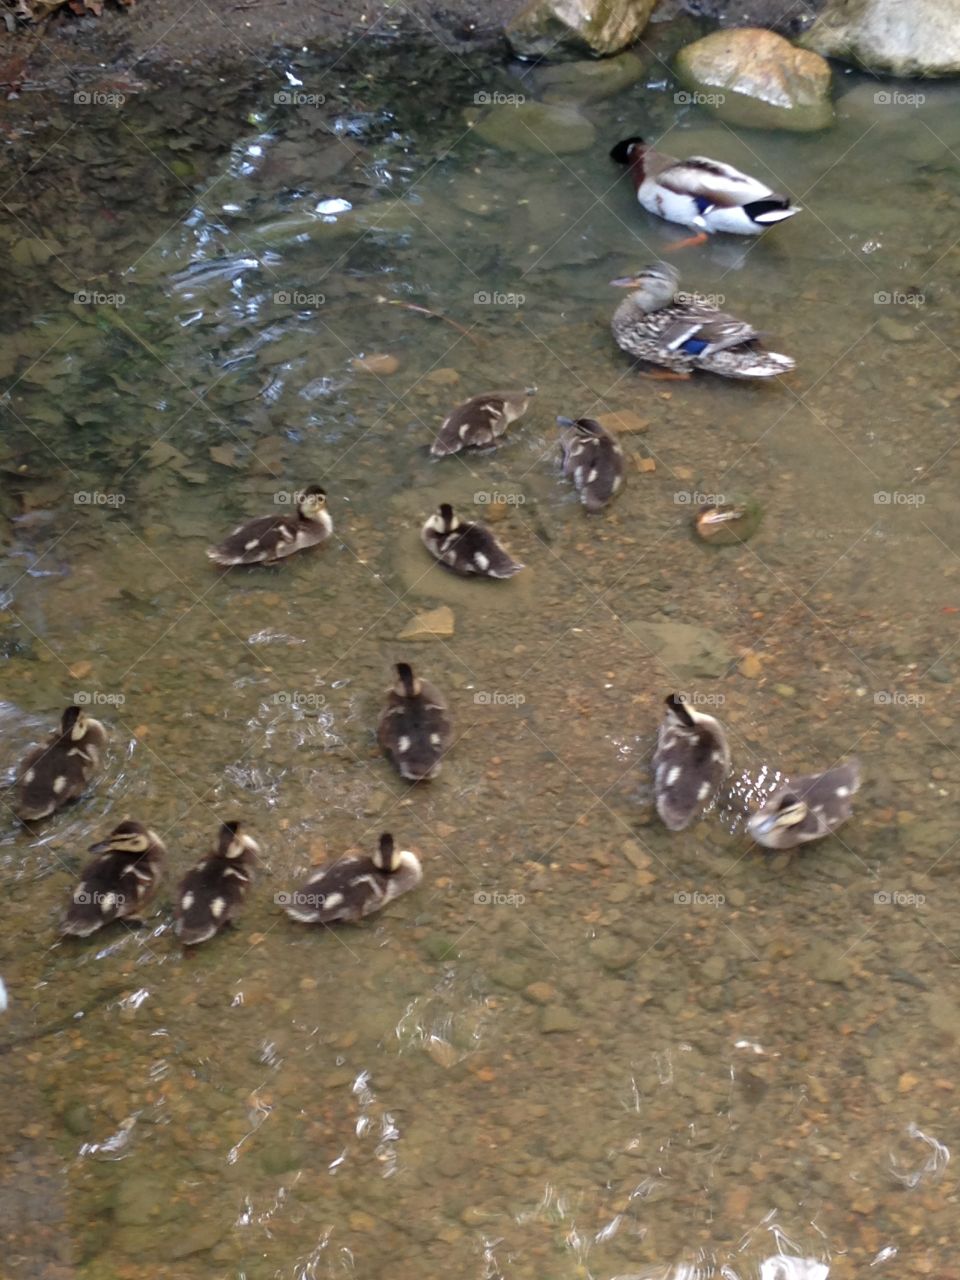 Mama duck and baby ducklings. Baby ducklings with mama duck